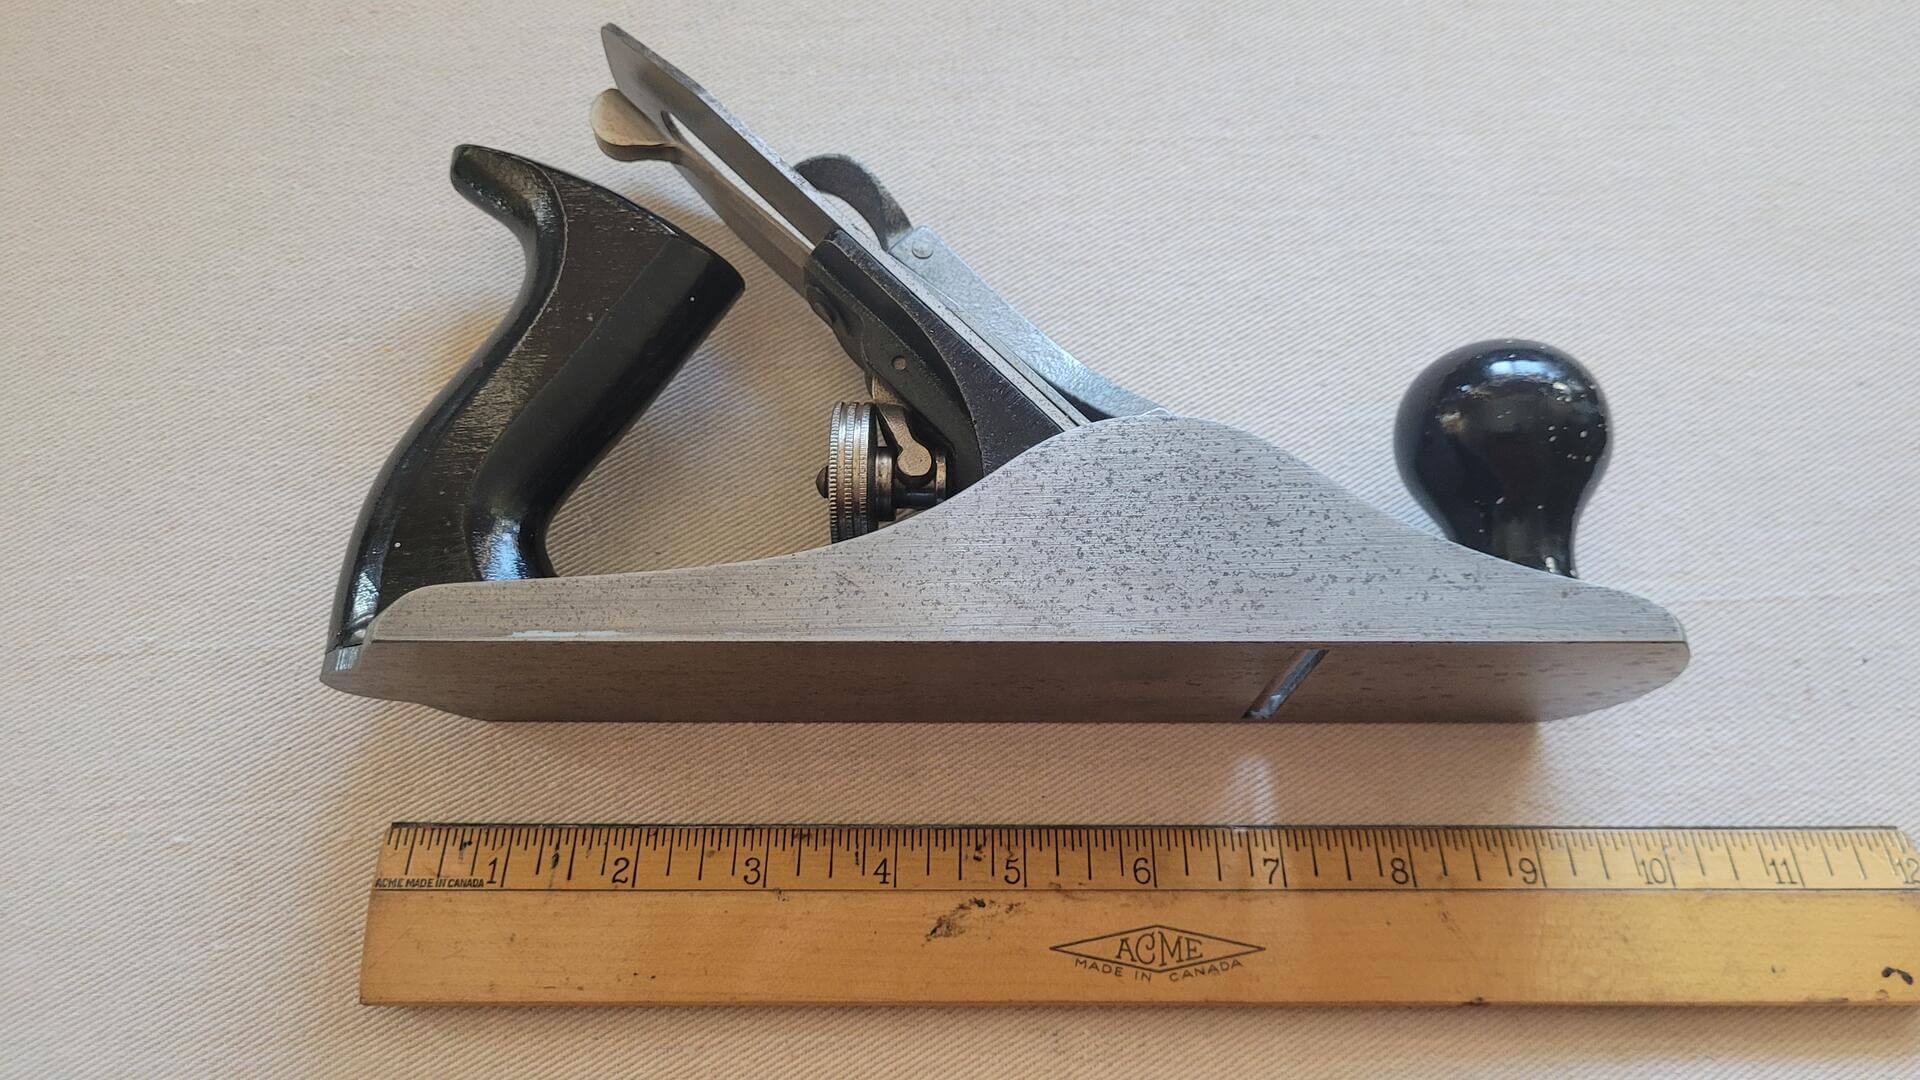 Vintage Stanley Handyman No. H1204 smooth bottom plane with the original wood latch case. Antique made in Canada collectible carpentry and woodworking plane and edge hand tools